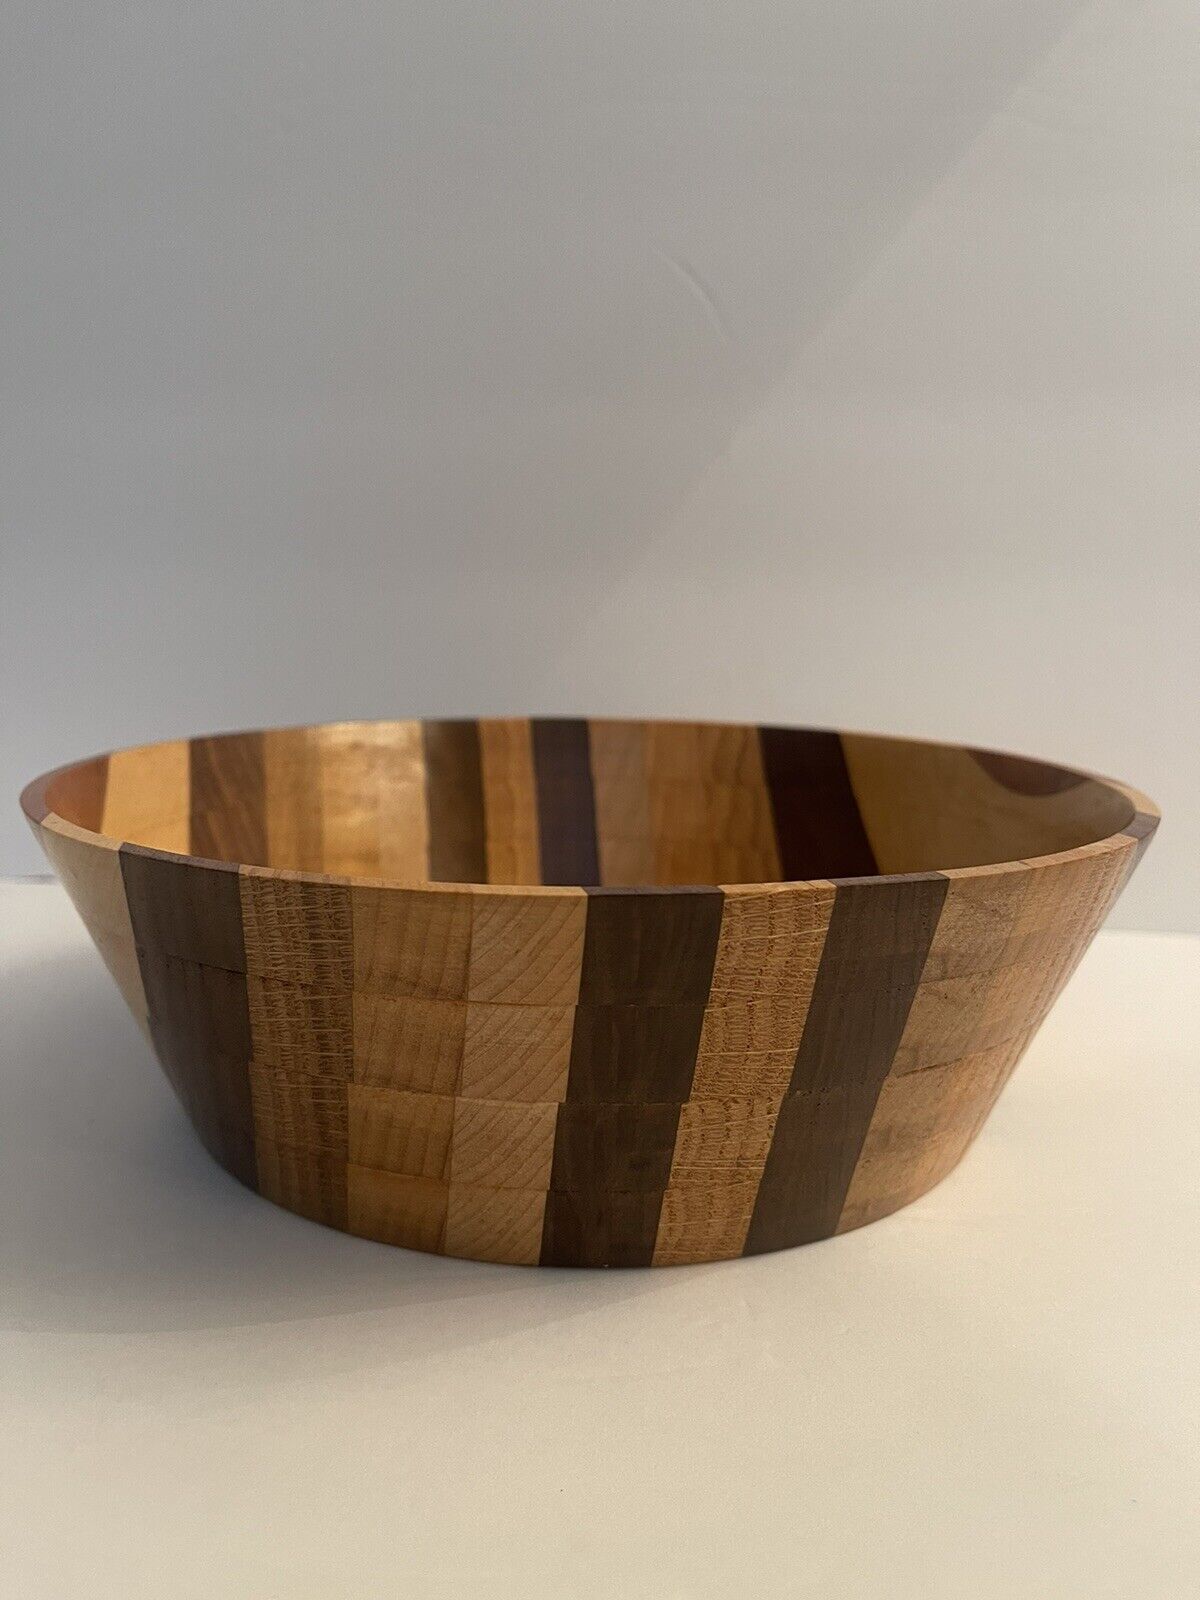 Retro Segmented Handcrafted Wooden Bowl